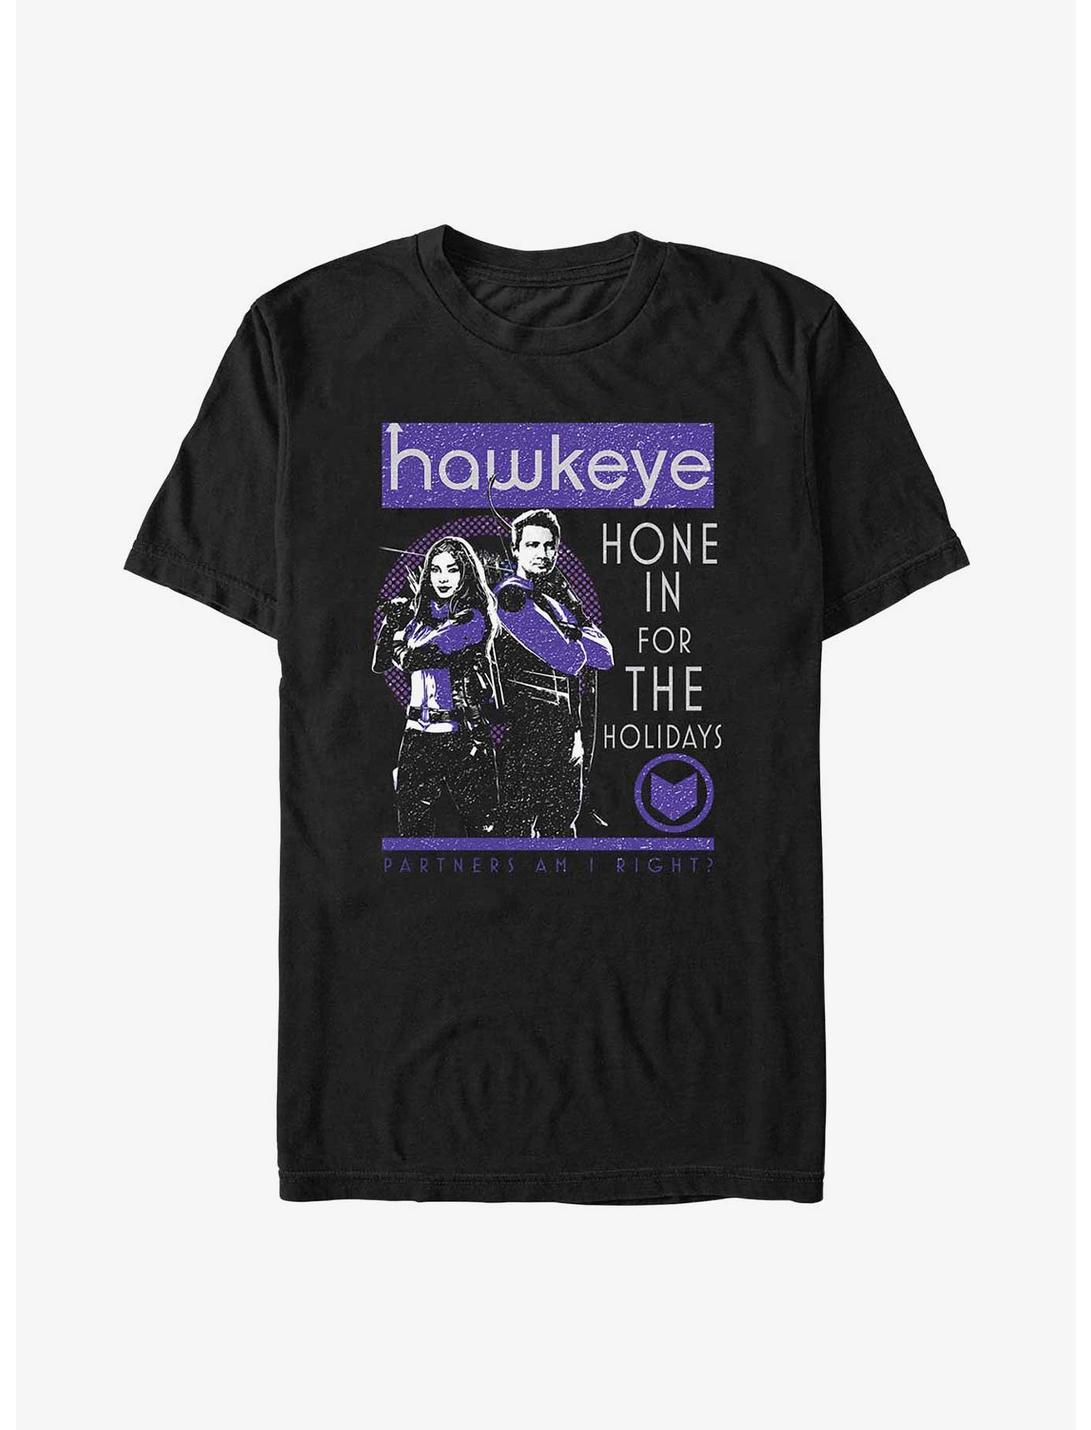 Marvel Hawkeye Hone In For The Holidays Poster T-Shirt, BLACK, hi-res